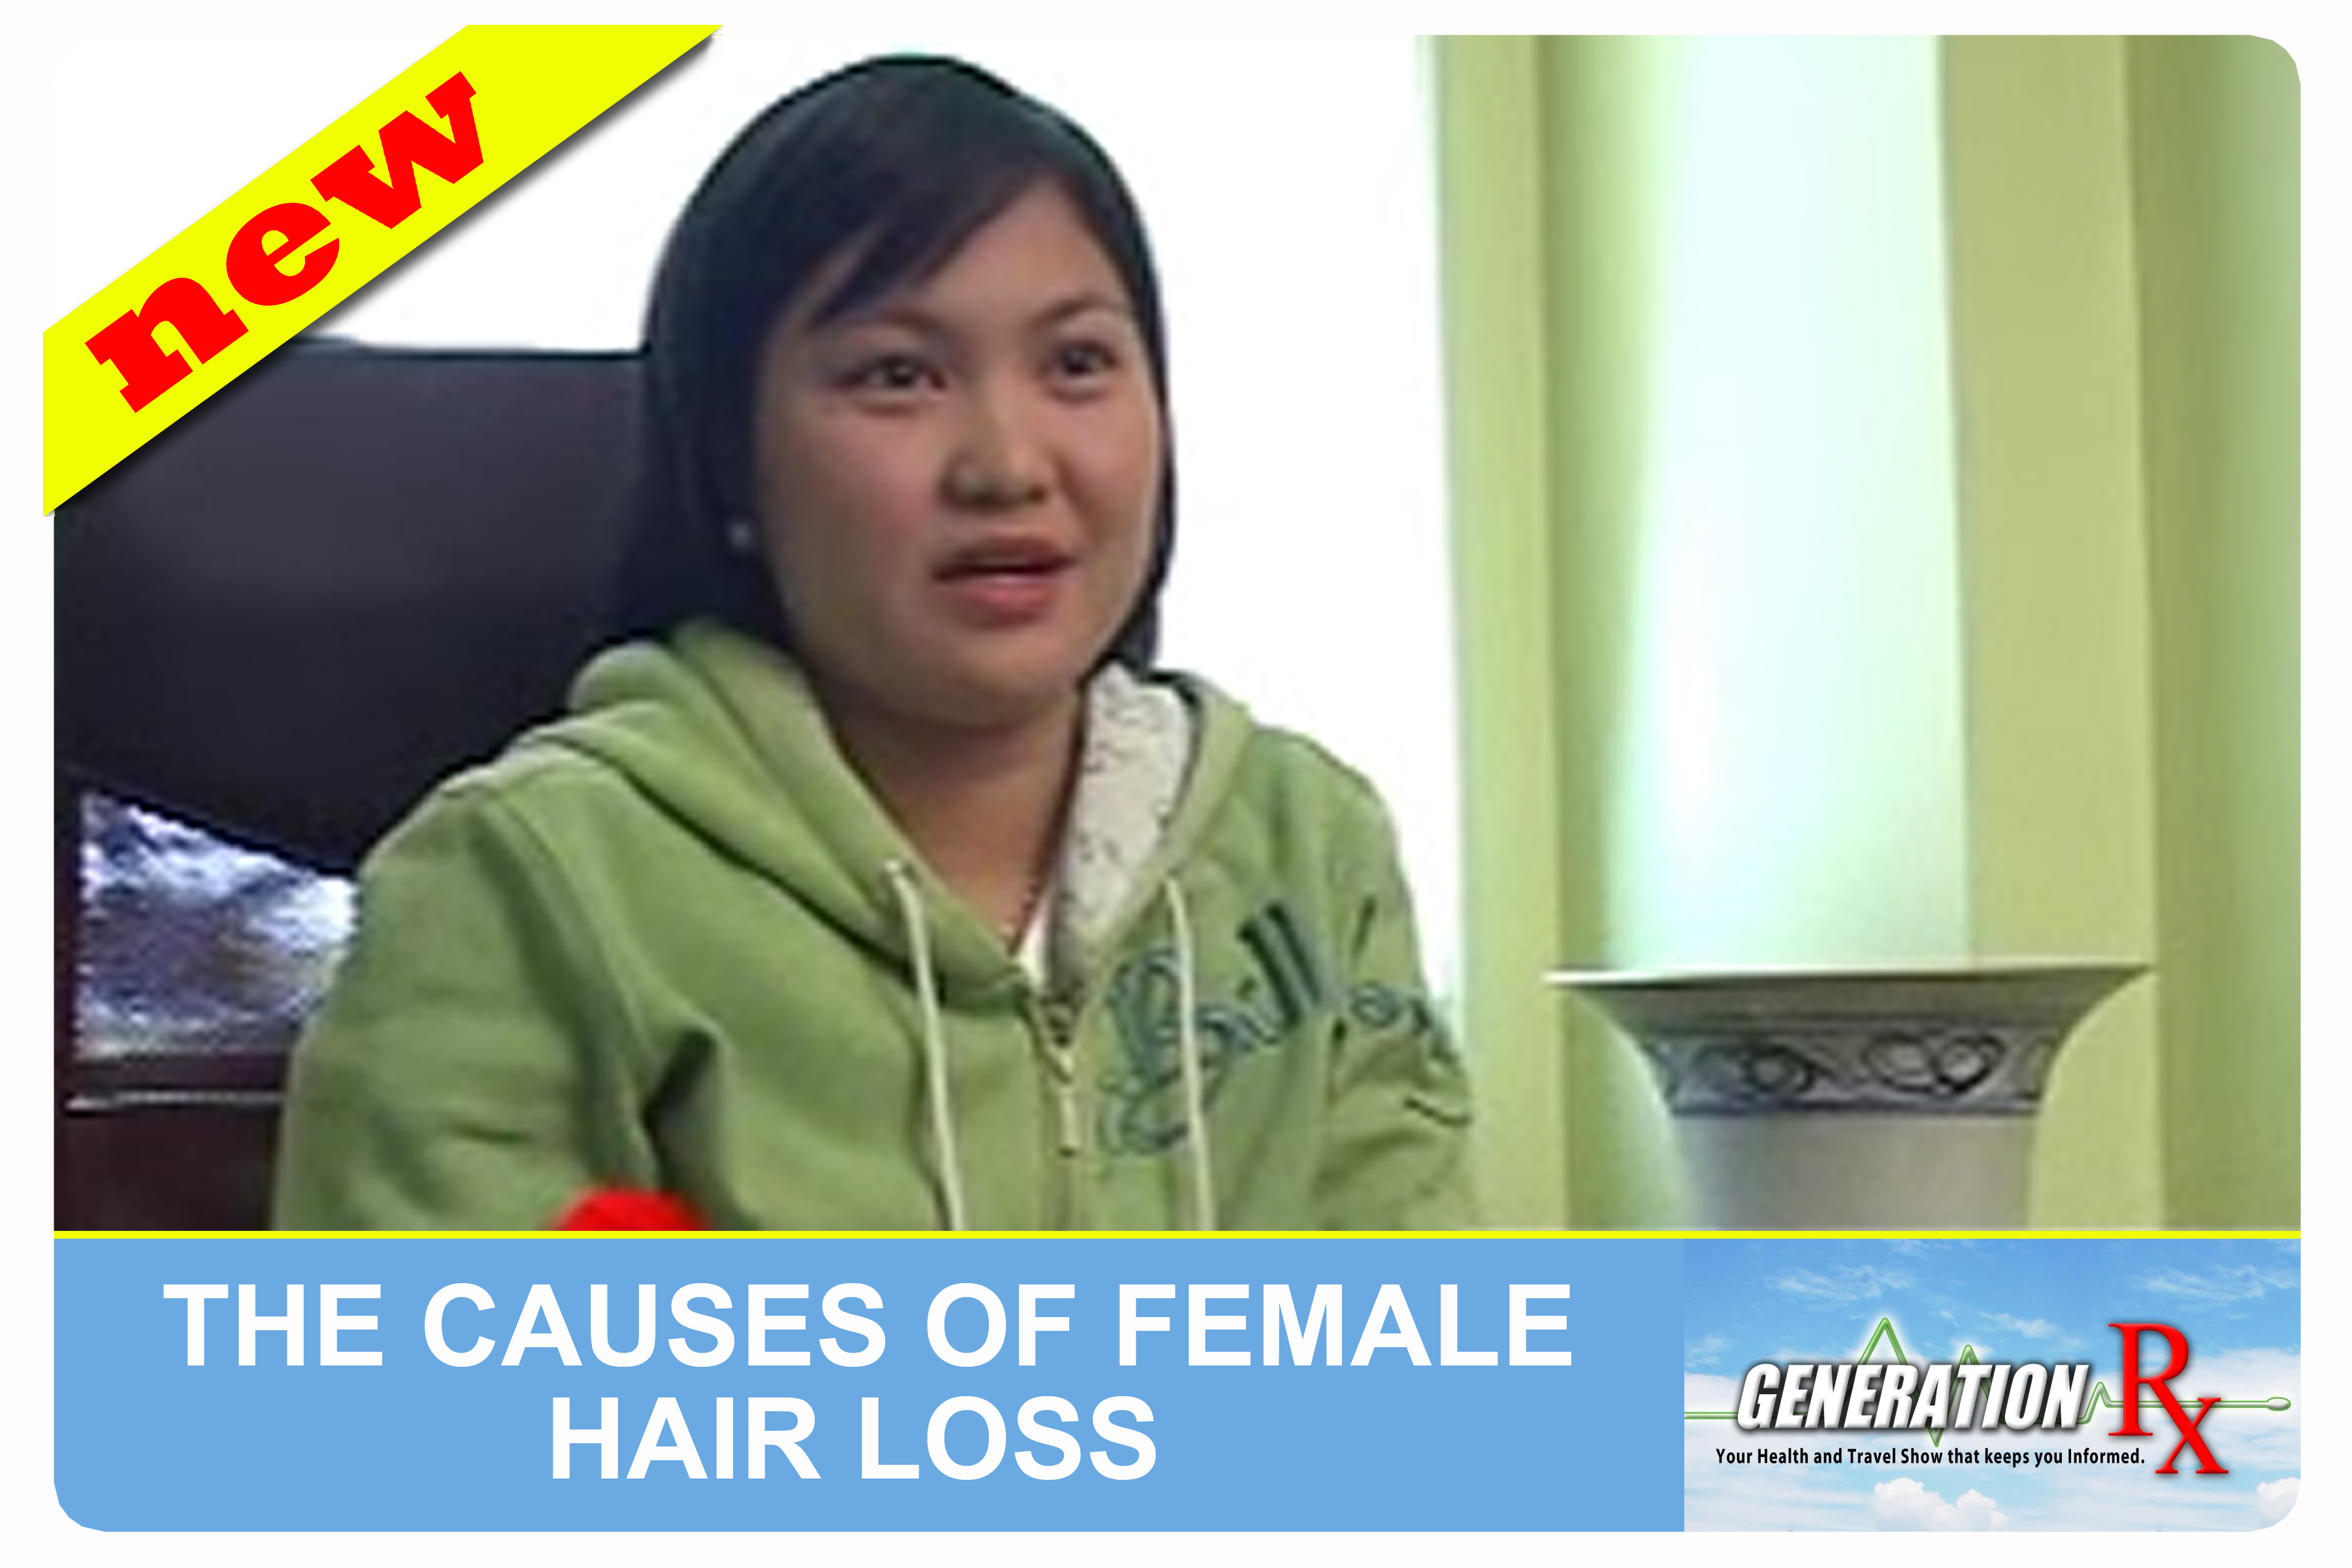  23 Generation Rx tackles Novuhair amp; the Causes of Female Hair Loss